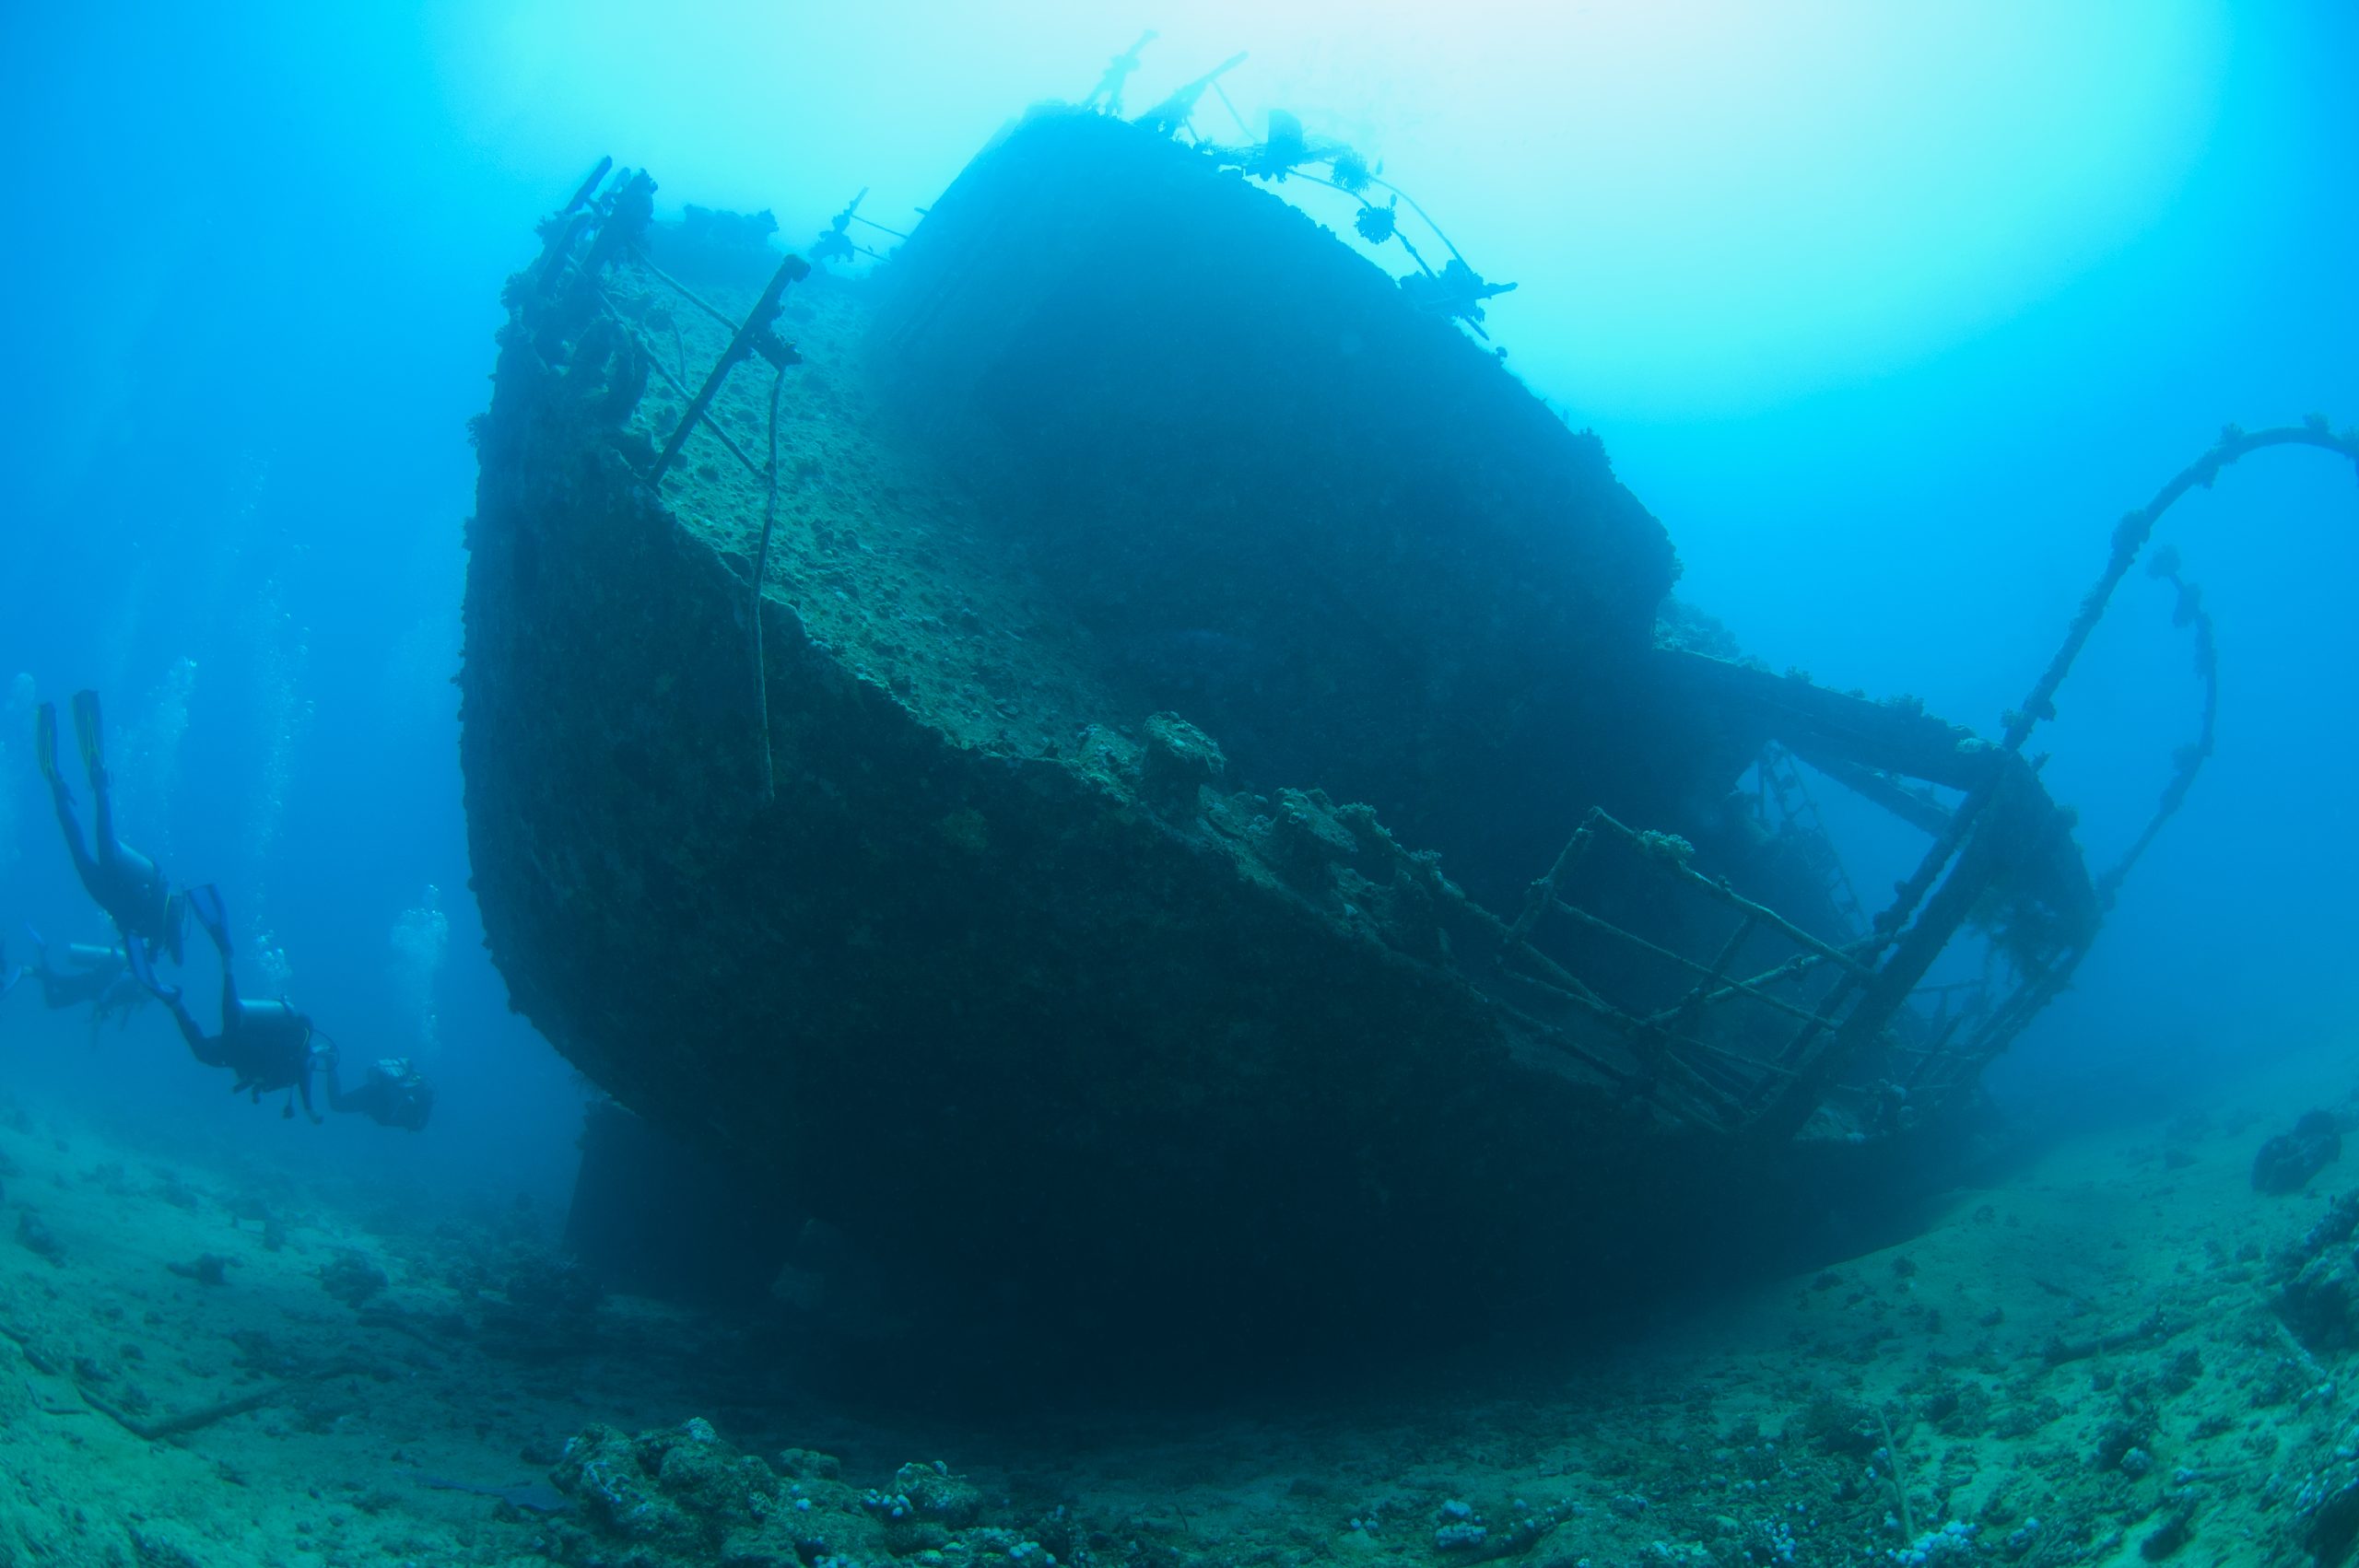 A photograph of a shipwreck. YAYIMAGES.